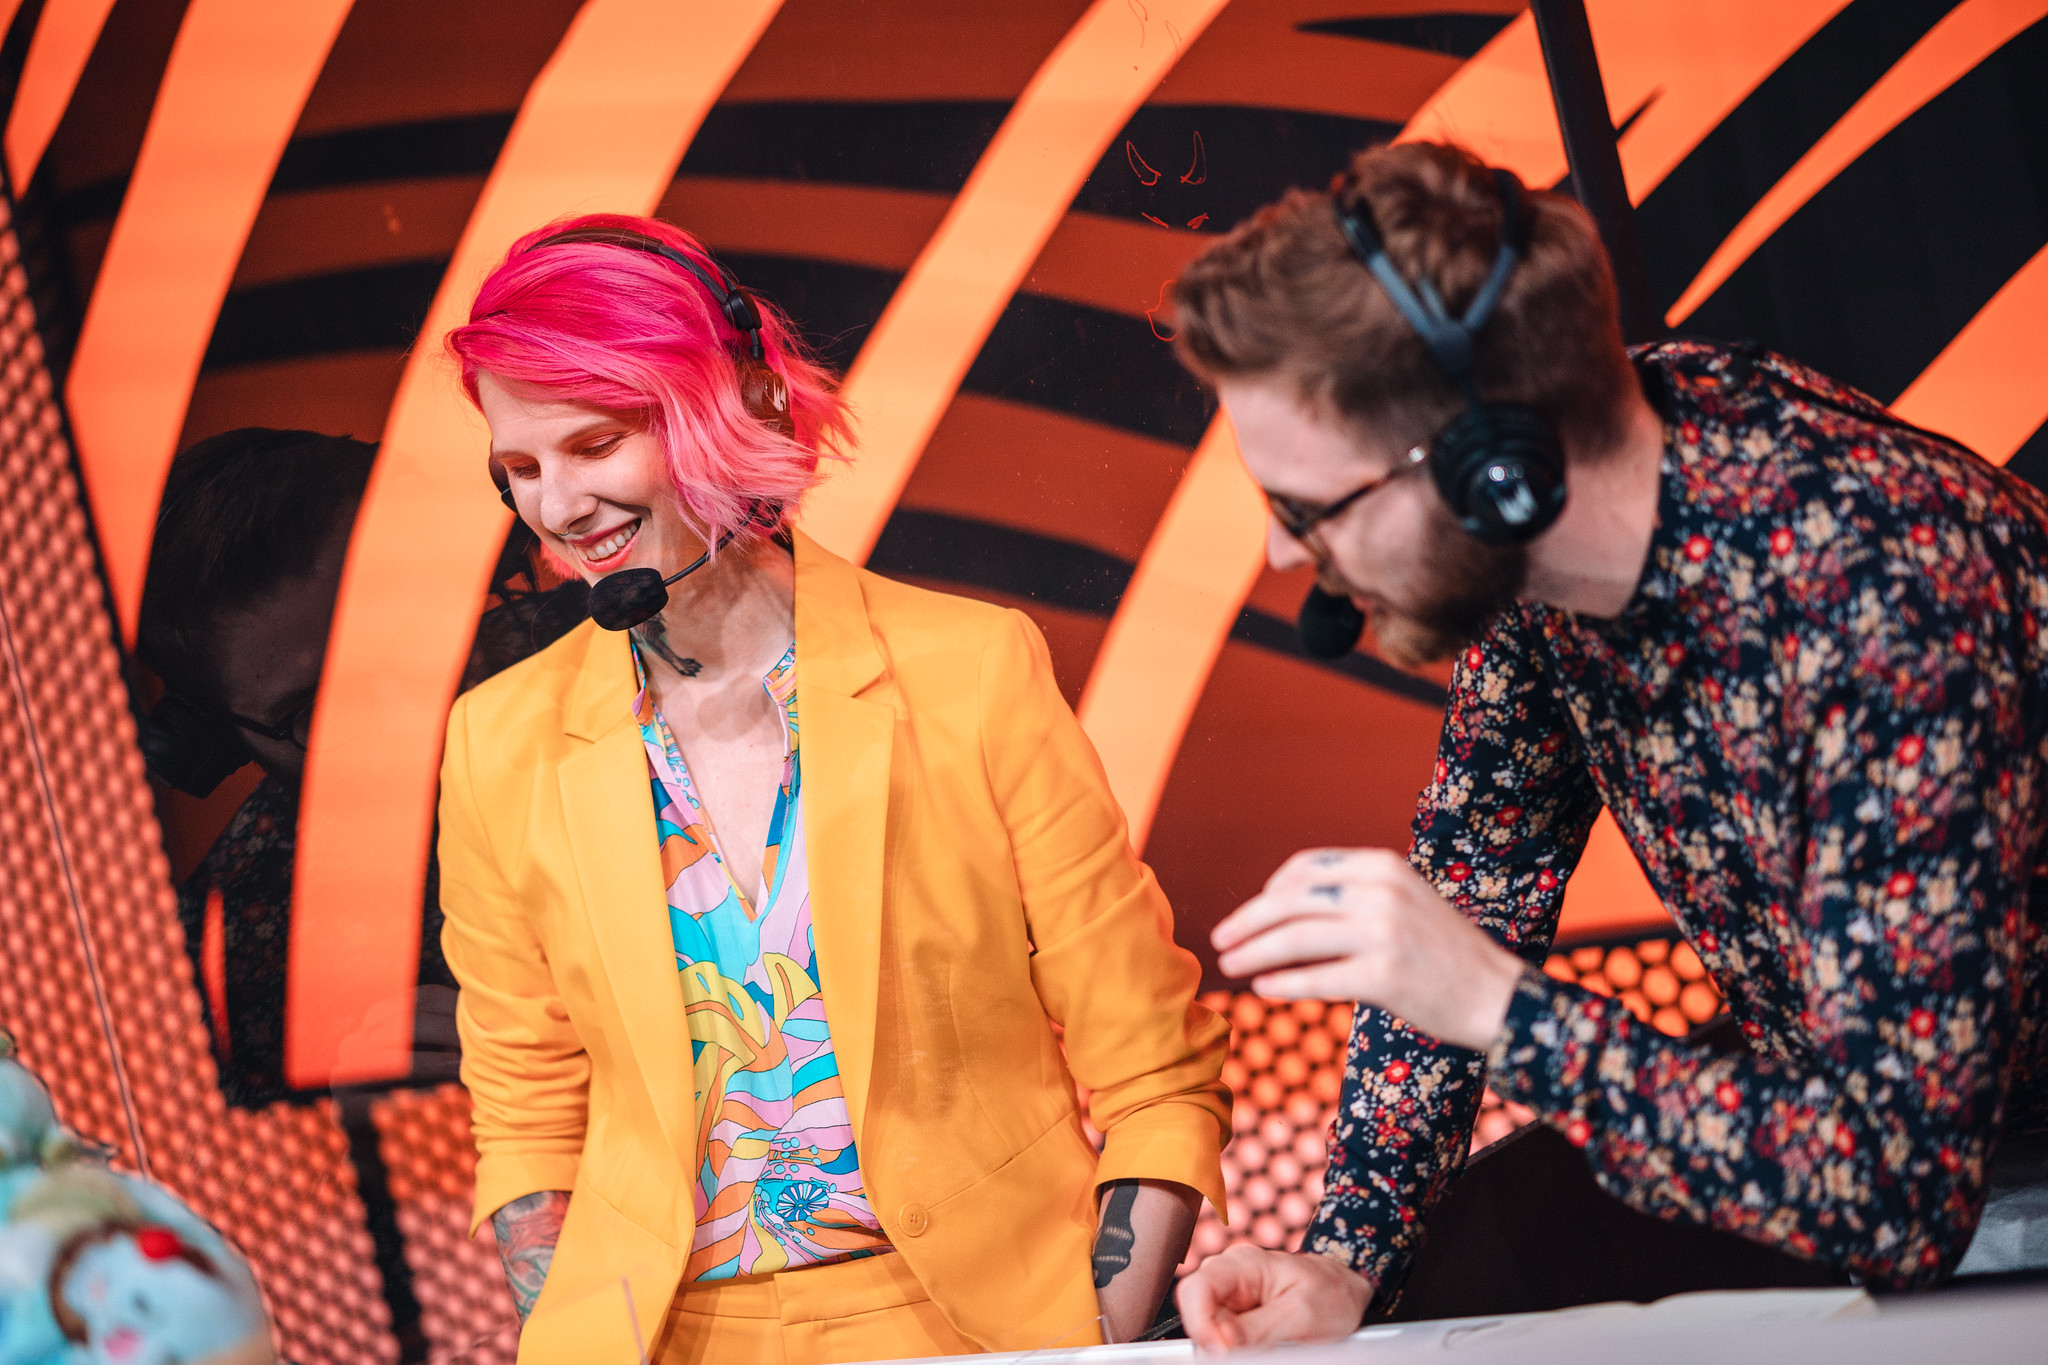 Froskurinn speaks on her casting legacy, and how the “power of friendship” made the LEC broadcast so special